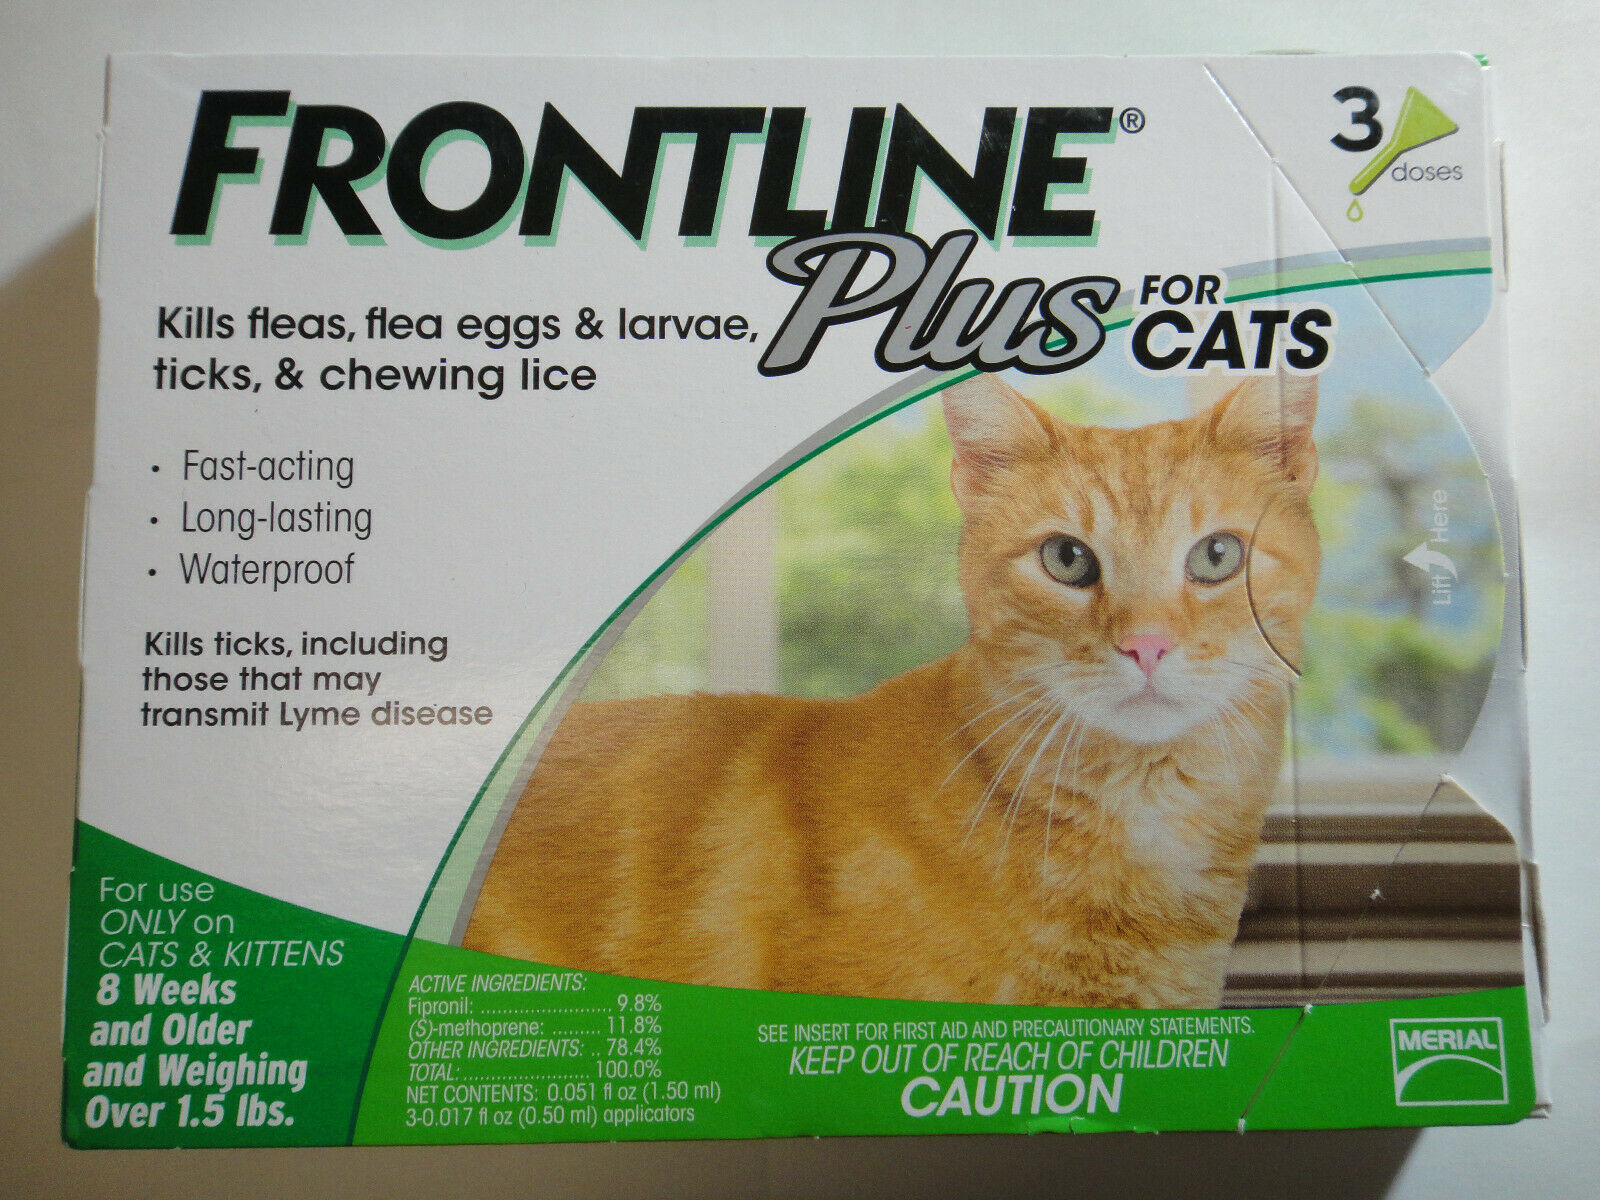 Frontline Plus Cats & Kittens Flea & Tick Control 3 Doses Brand New, Sealed